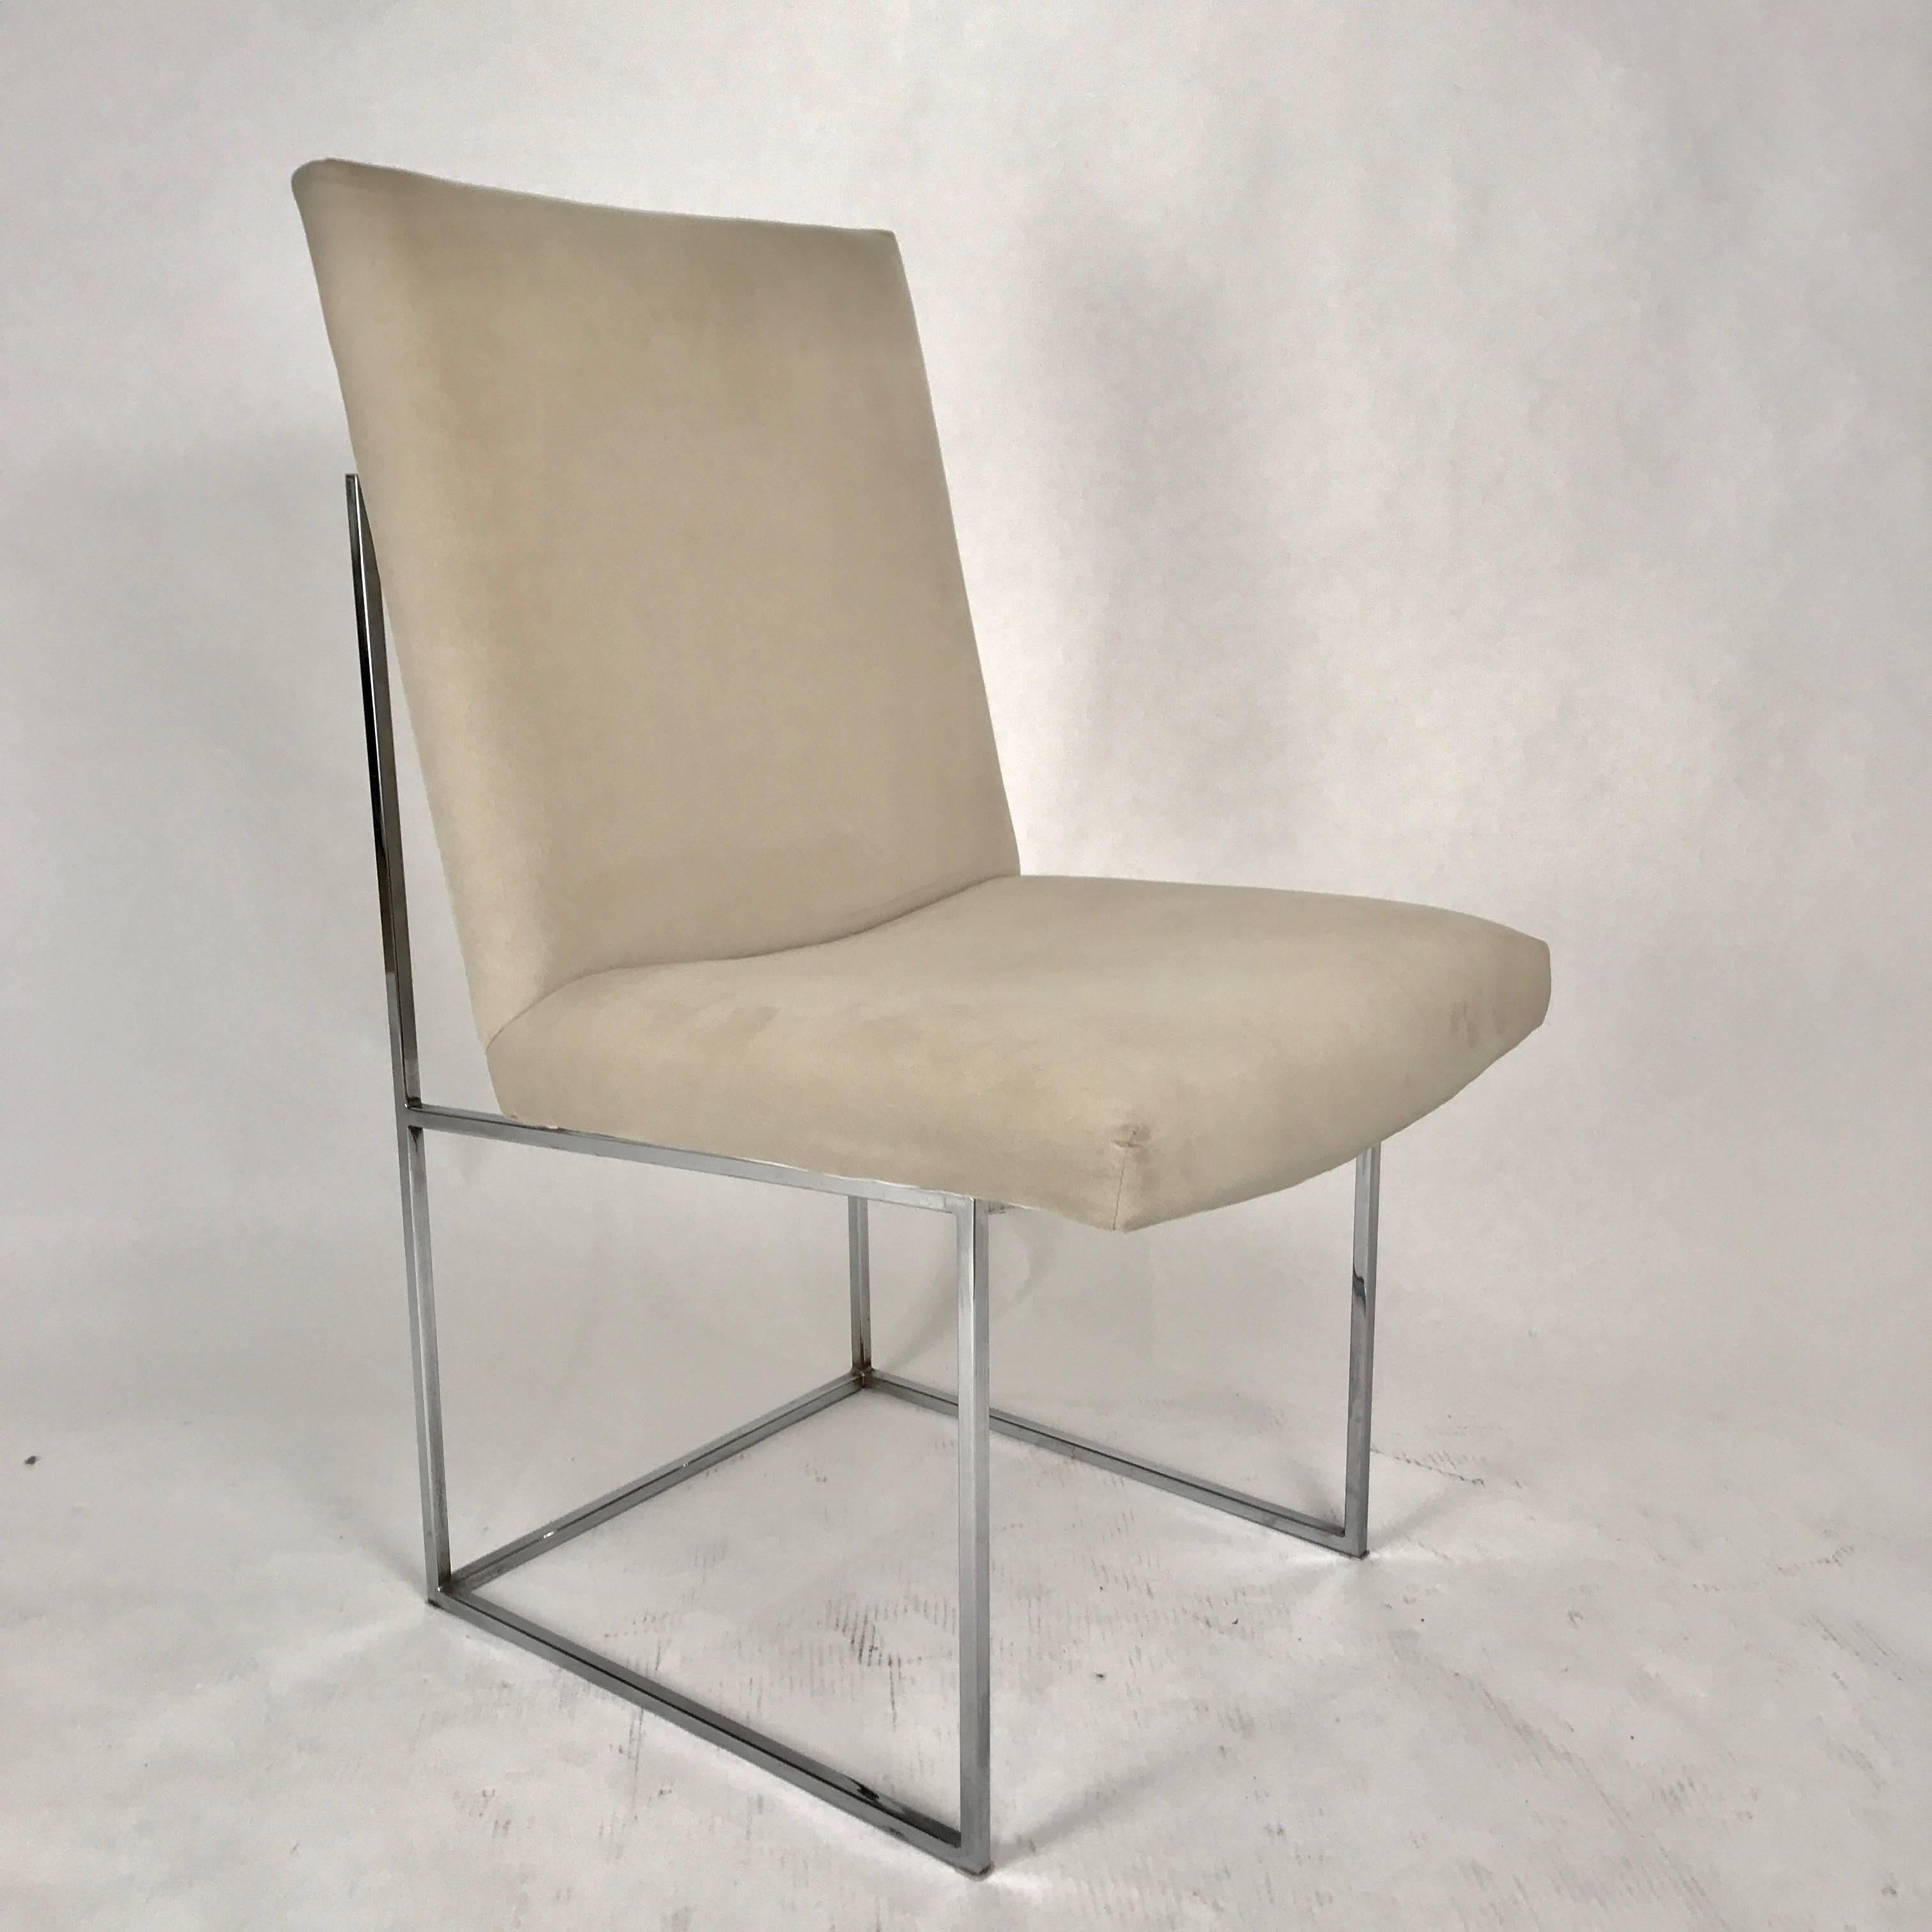 American Milo Baughman for Thayer Coggin Chrome Framed Dining Chairs with Ultrasuede